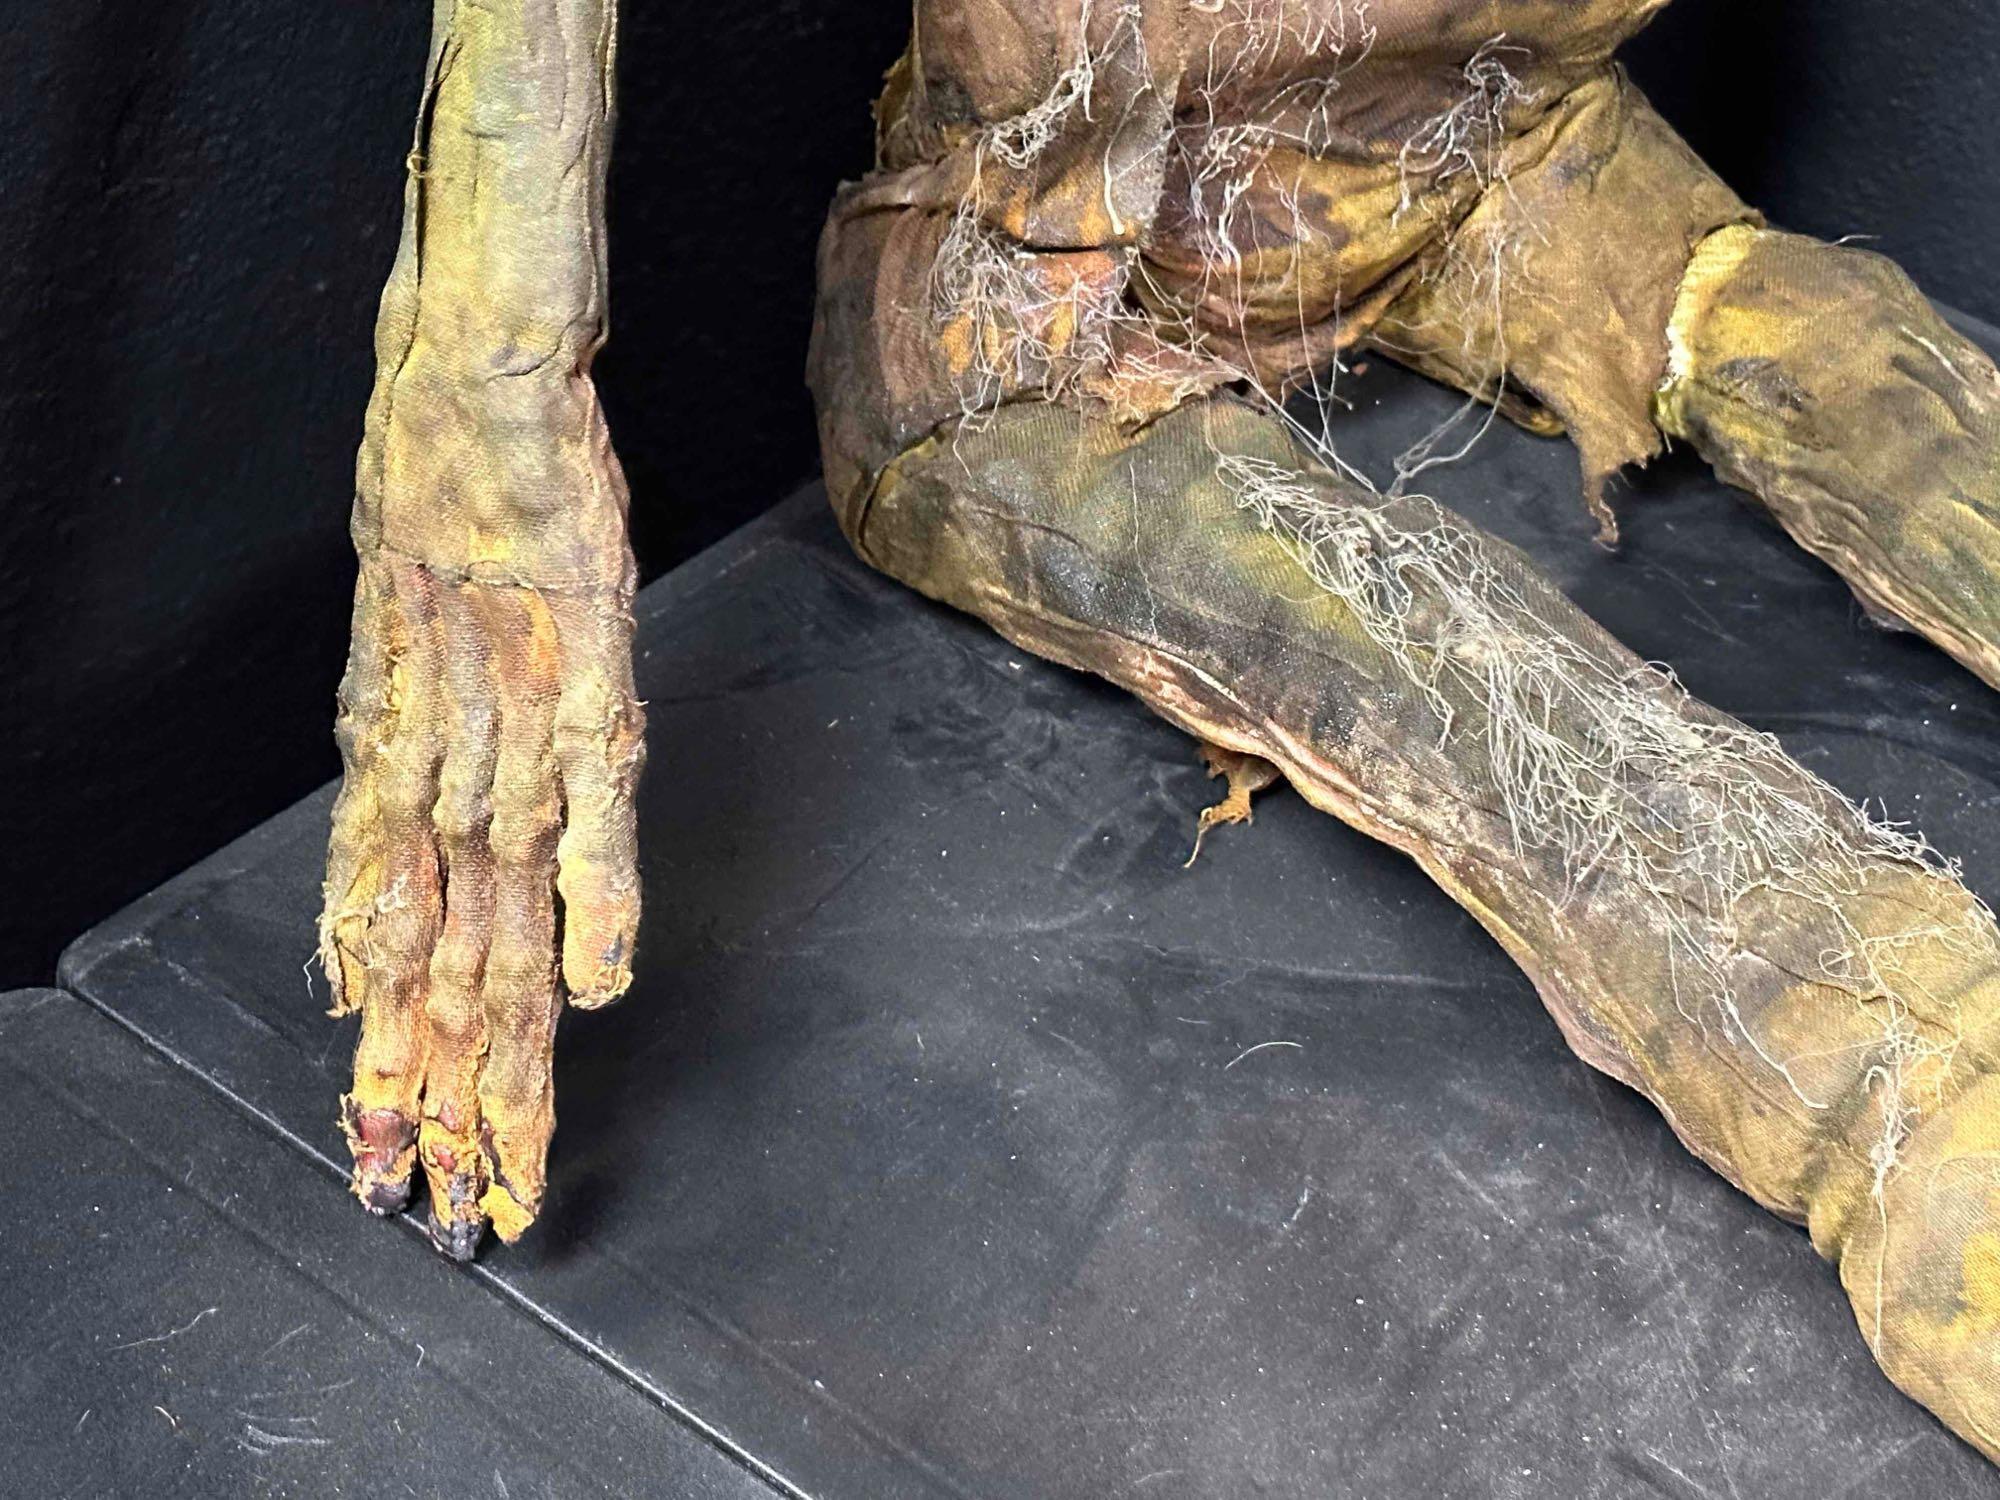 Life Size Realistic Rotting Human Corpse Prop. For Halloween, Film, more